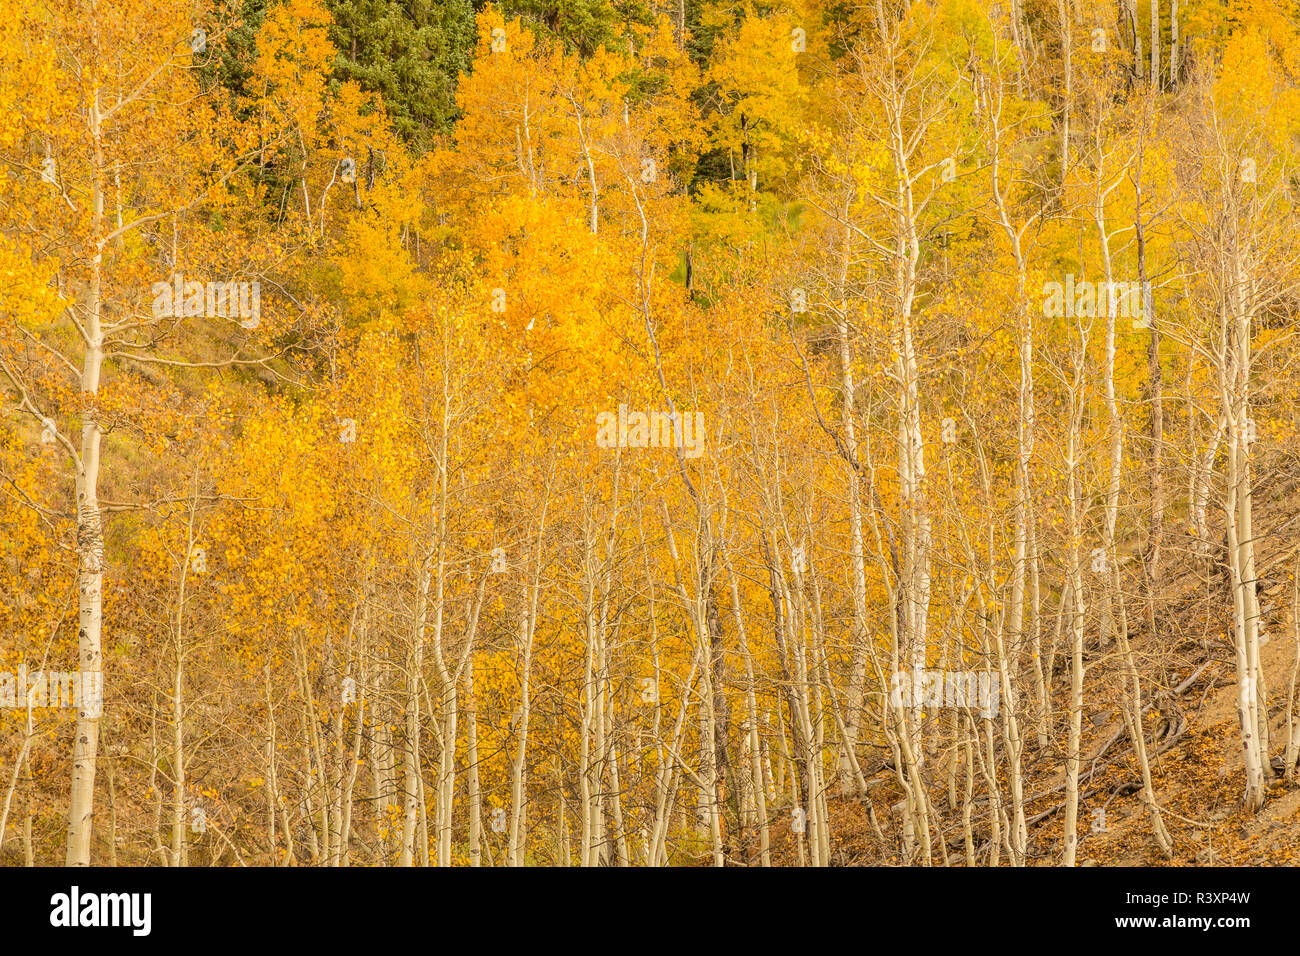 USA, Colorado, Gunnison National Forest. Aspen trees in fall color. Stock Photo